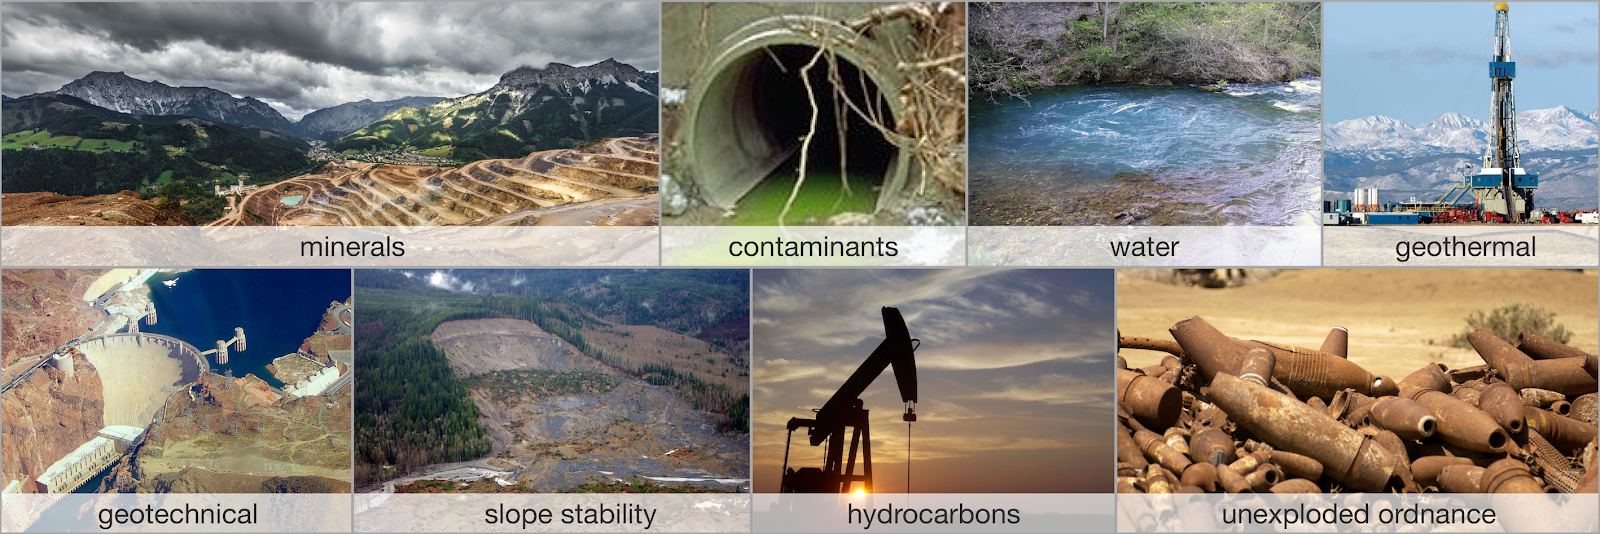 Examples of geophysical experiments: (a) finding resources (minerals, water, hydrocarbons, geothermal energy); (b) environmental problems (contaminants, salt water, UXO, permafrost), (c) geotechnical (tunnels, infrastructure, slope stability); (d) natural hazards (earthquakes, volcanoes, tsunami); (e) subsurface storage (radioactive waste, CO2 sequestration, water).